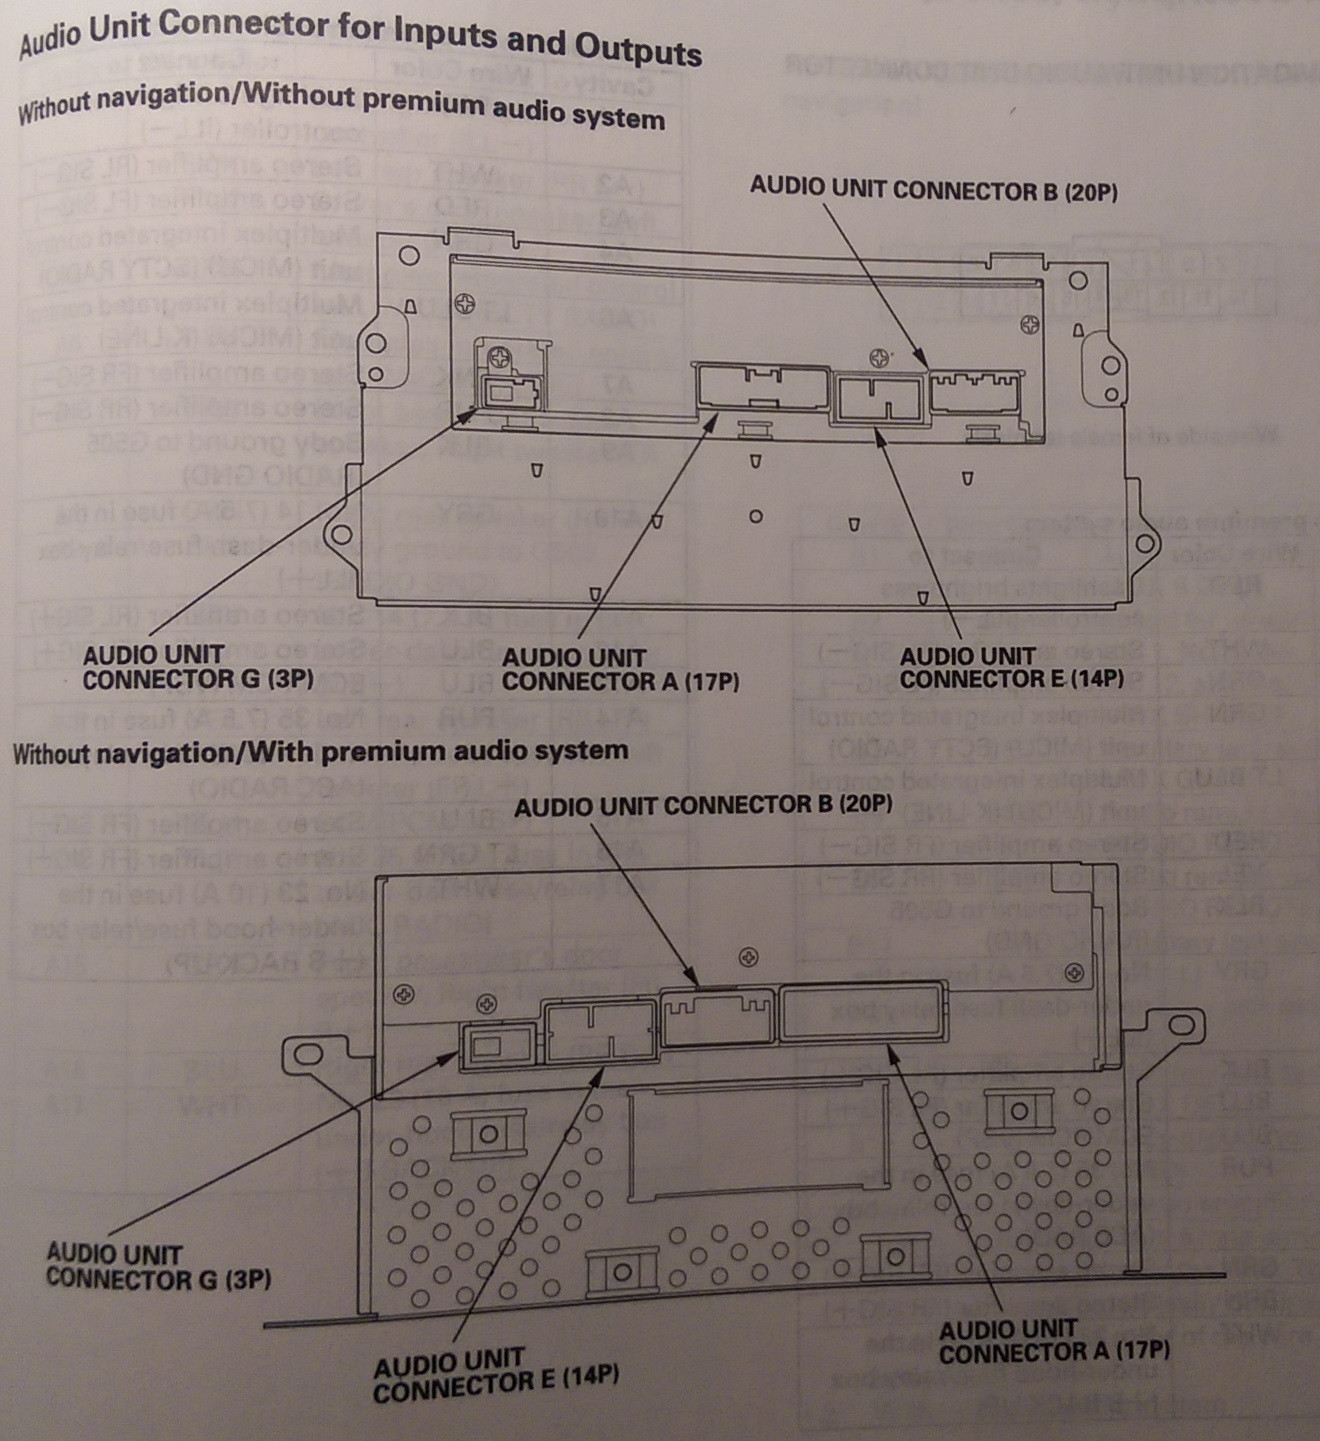 Acura Mdx 2004 Mdx Radio Steering Wheel Control Factory Harness Wiring Diagram Color from schematron.org